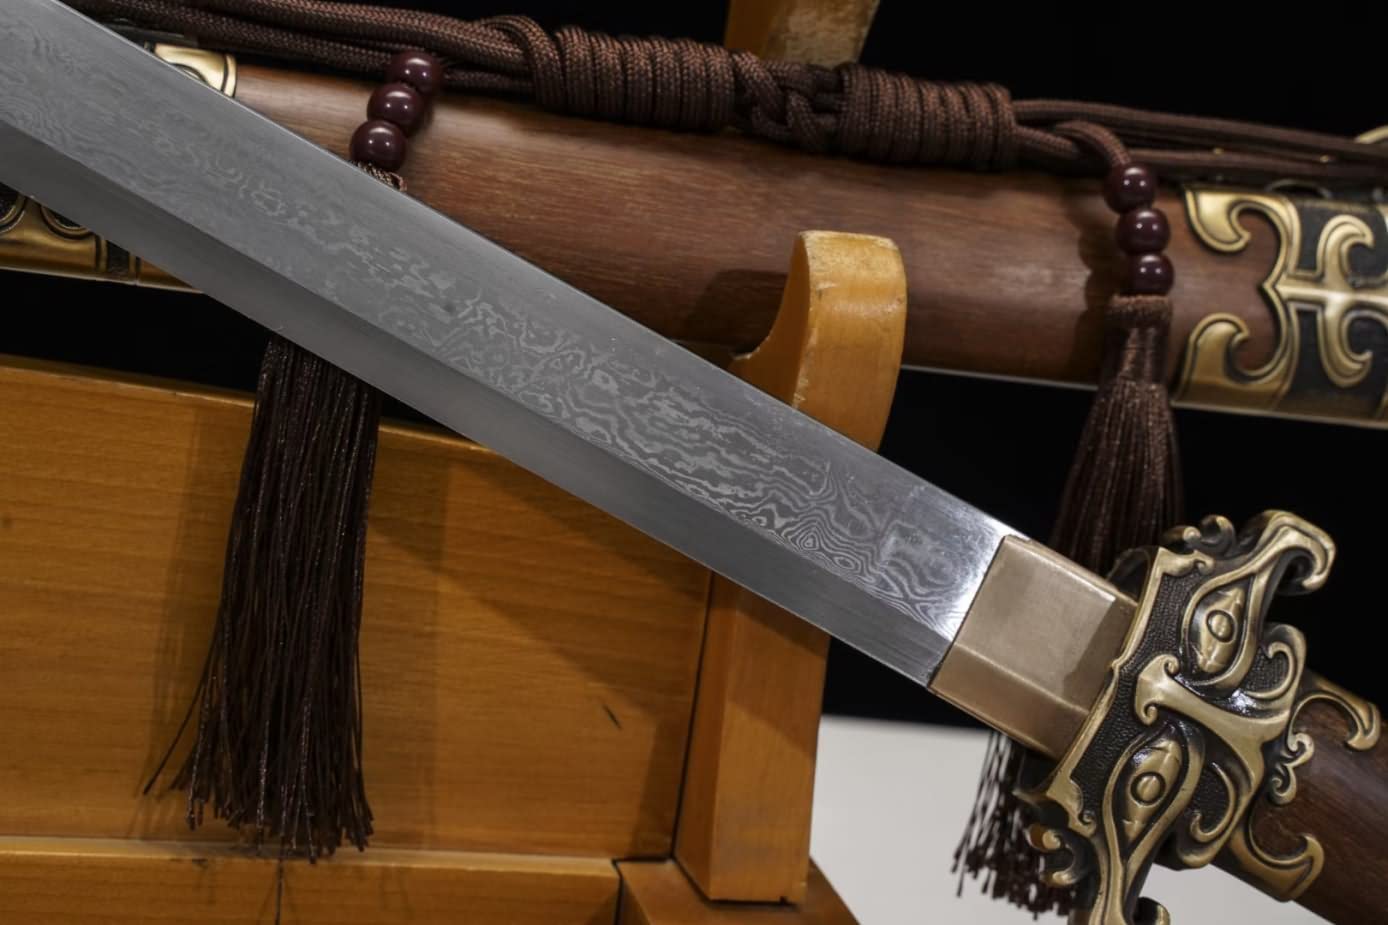 Tang dao, Damascus Steel Blades,Brass Fittings,Rosewood Scabbard,chinese sword